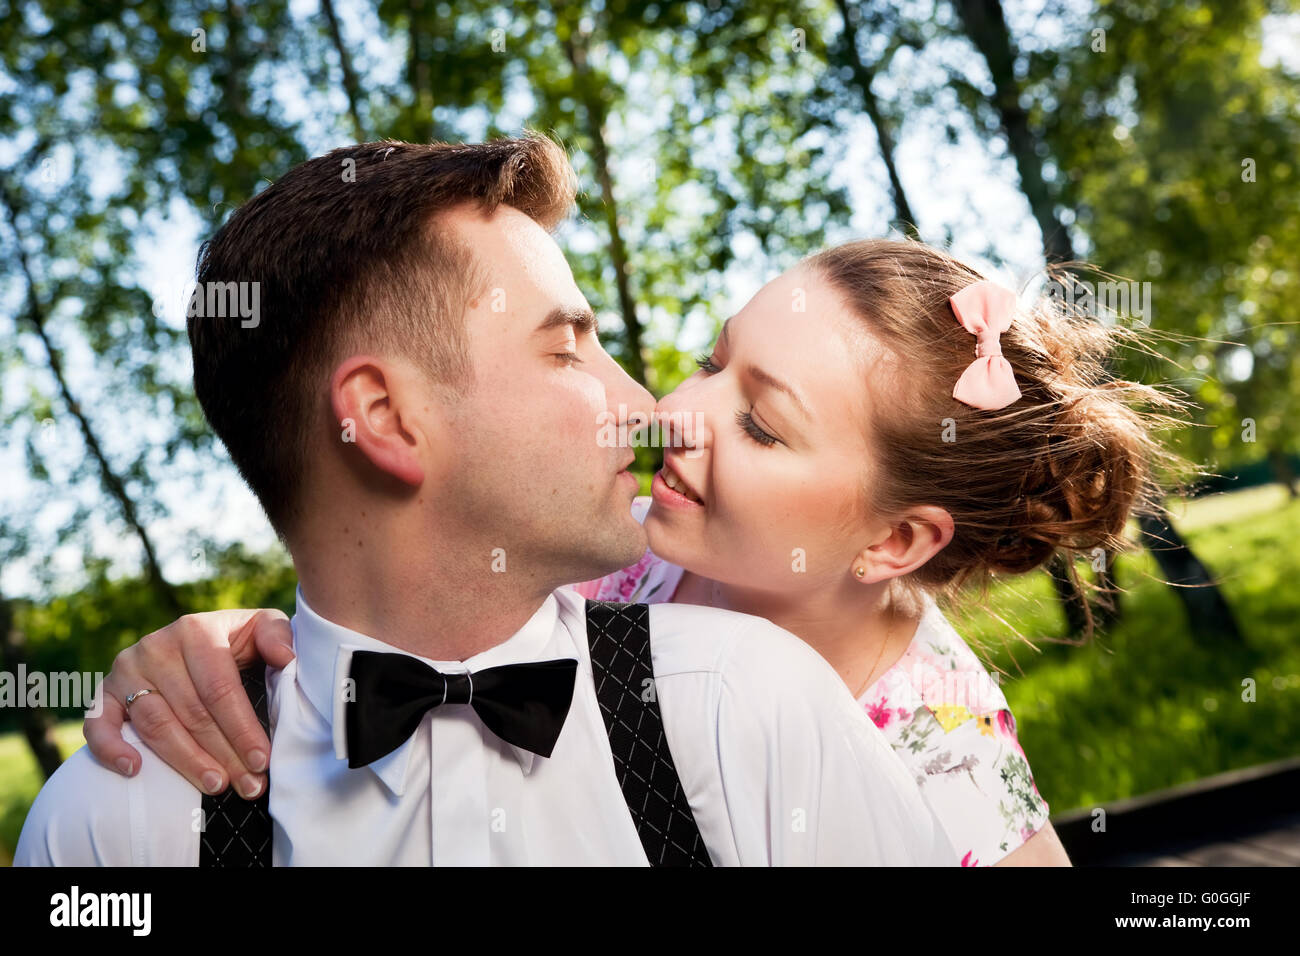 Young romantic couple in love flirting in summer park. Stock Photo